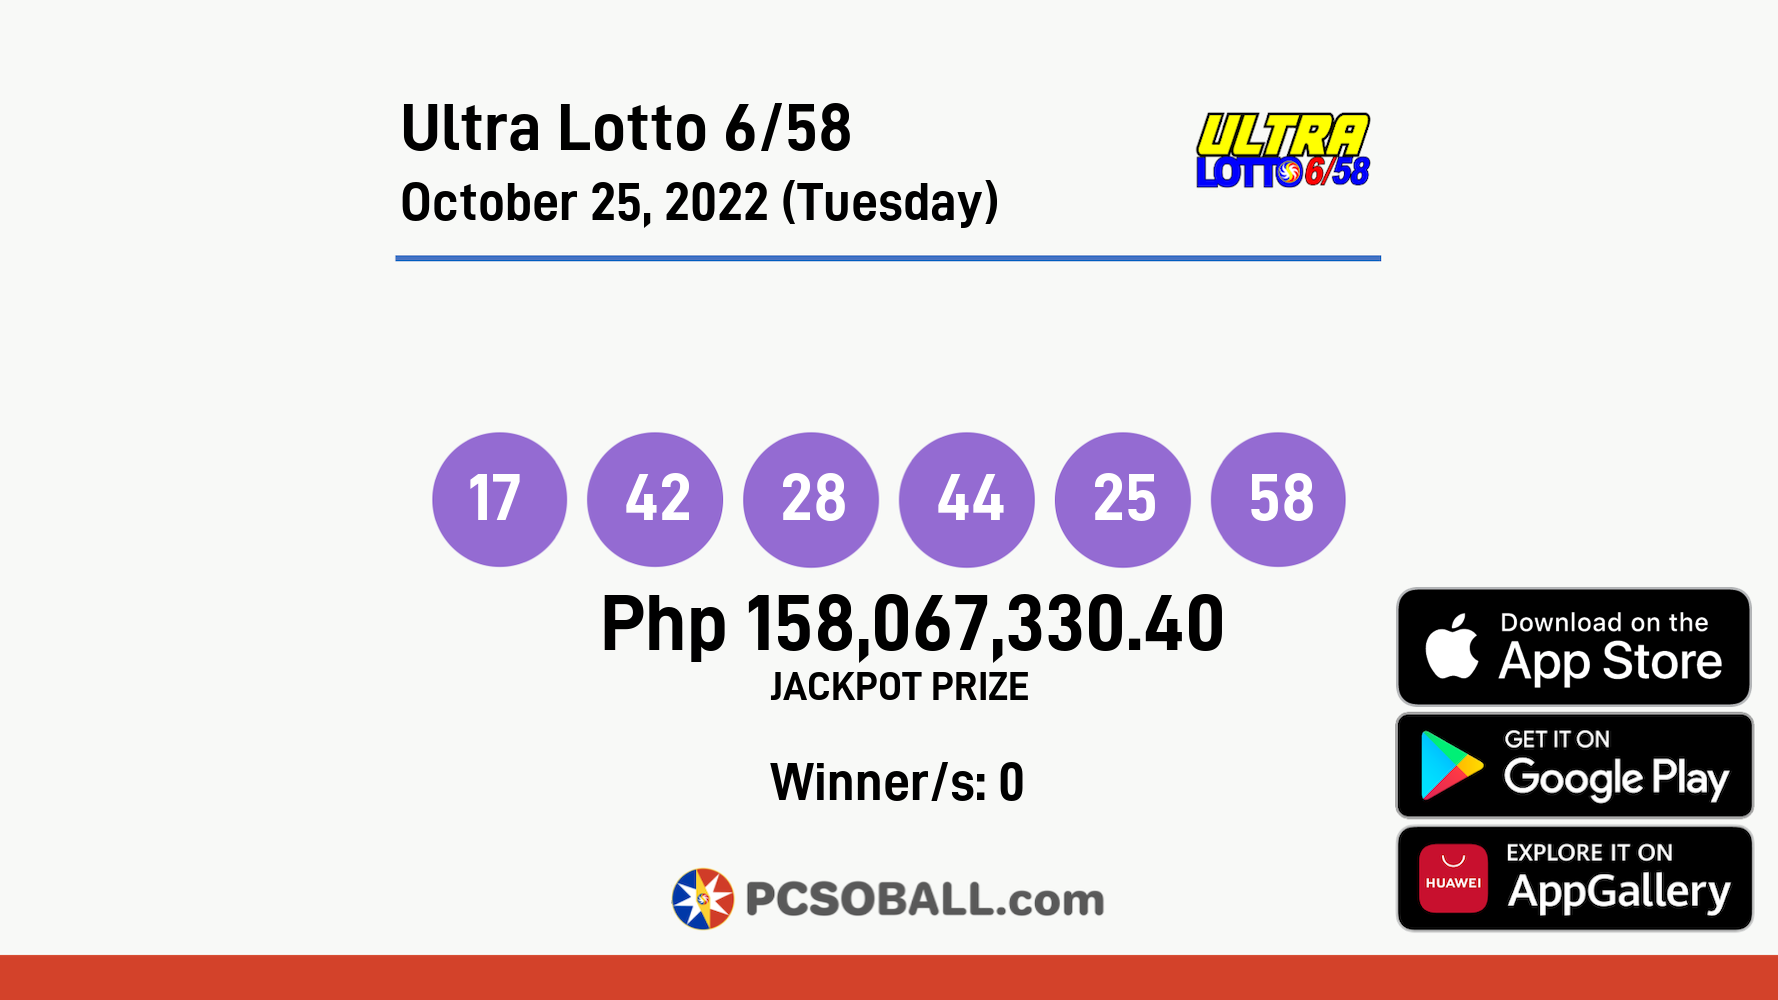 Ultra Lotto 6/58 October 25, 2022 (Tuesday) Result